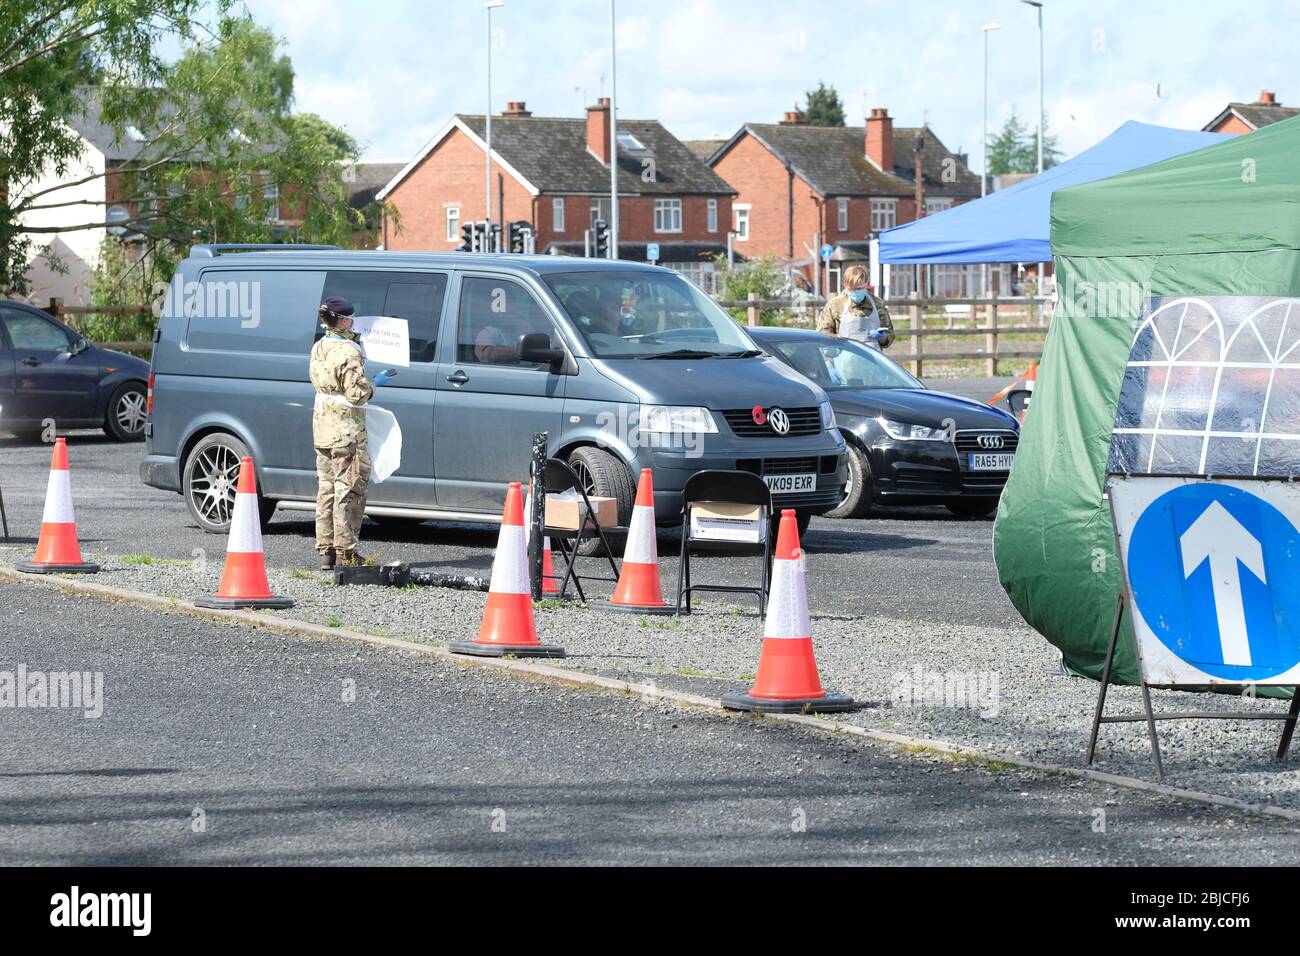 Hereford, Herefordshire UK - Wednesday 29th April 2020 - Army personnel man a pop-up Coronavirus testing site in a car park in Hereford to provide Covid-19 swab tests to frontline workers as the Government strives to reach 100,000 tests per day by the end of April.  Photo Steven May / Alamy Live News Stock Photo